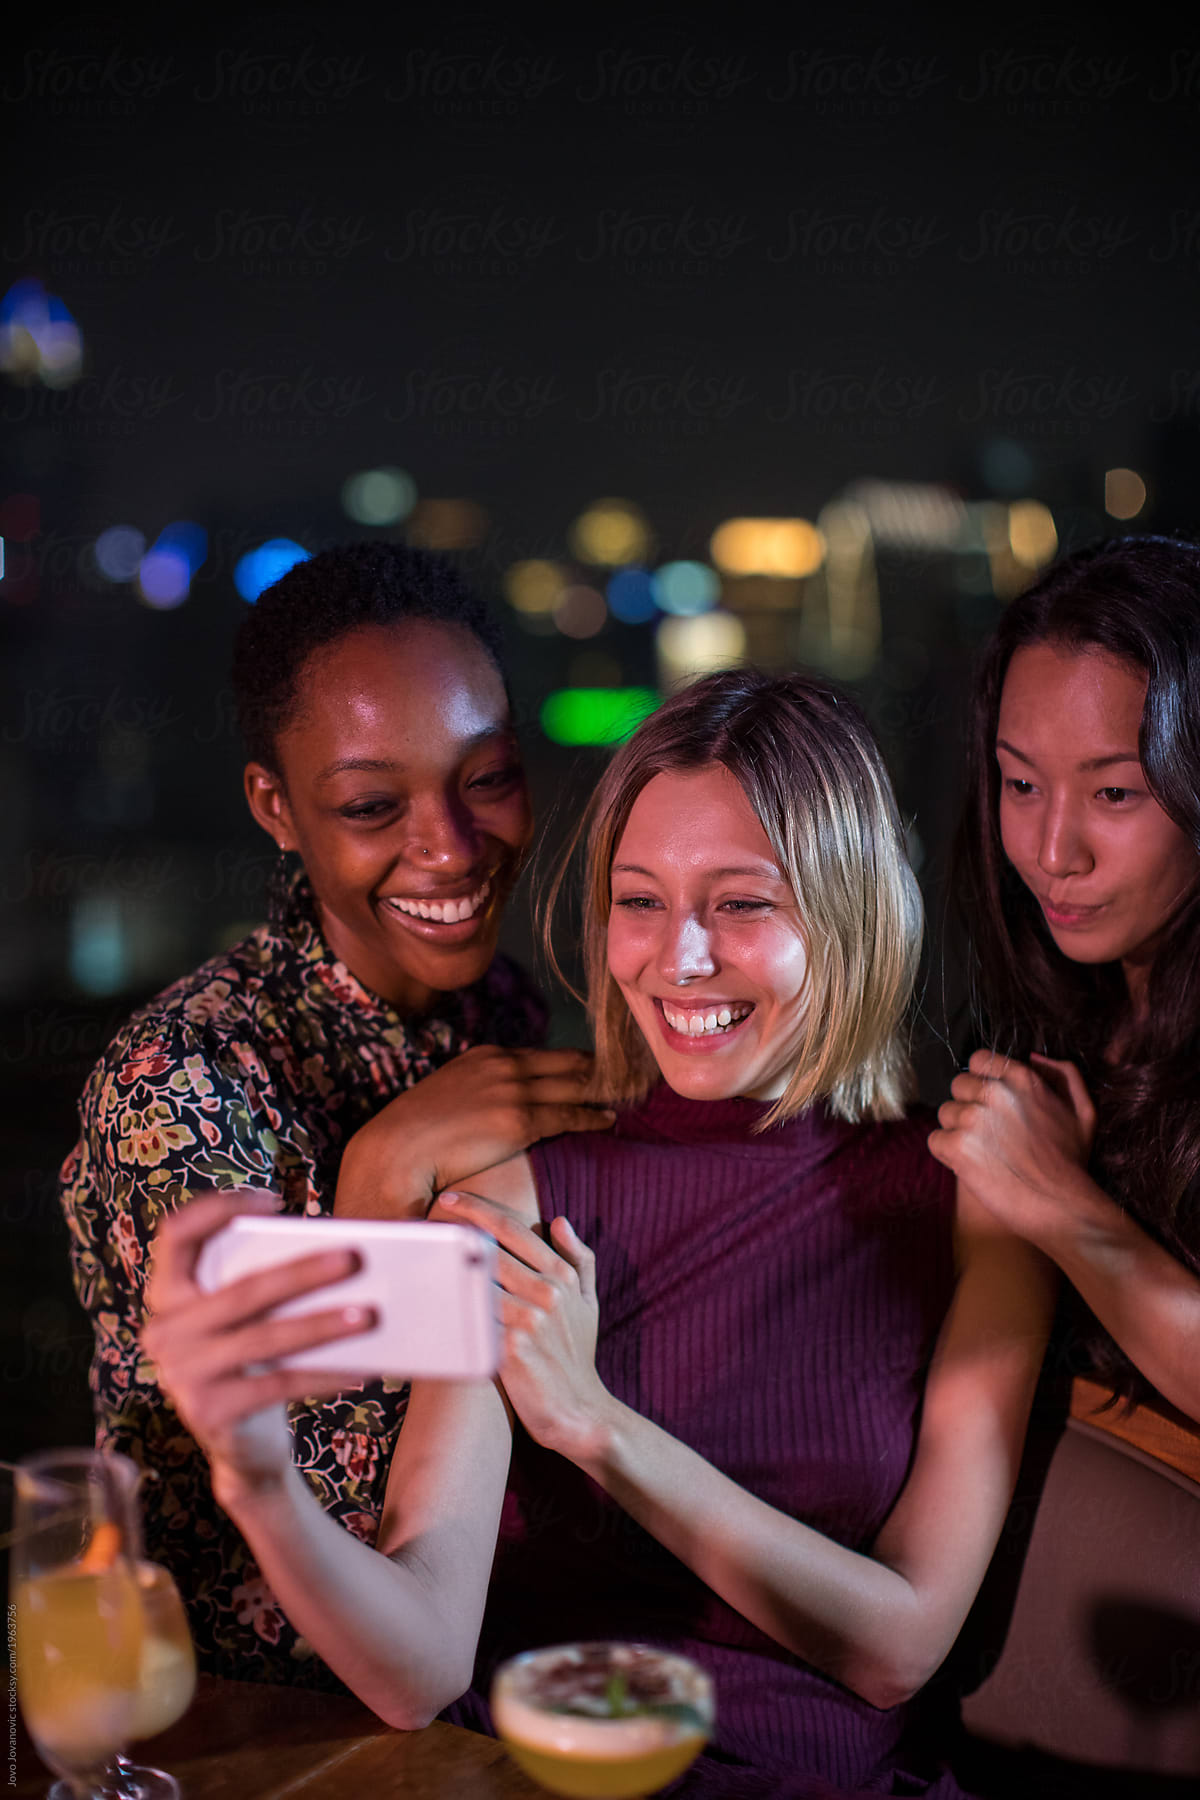 Three coworkers taking selfie together at bar